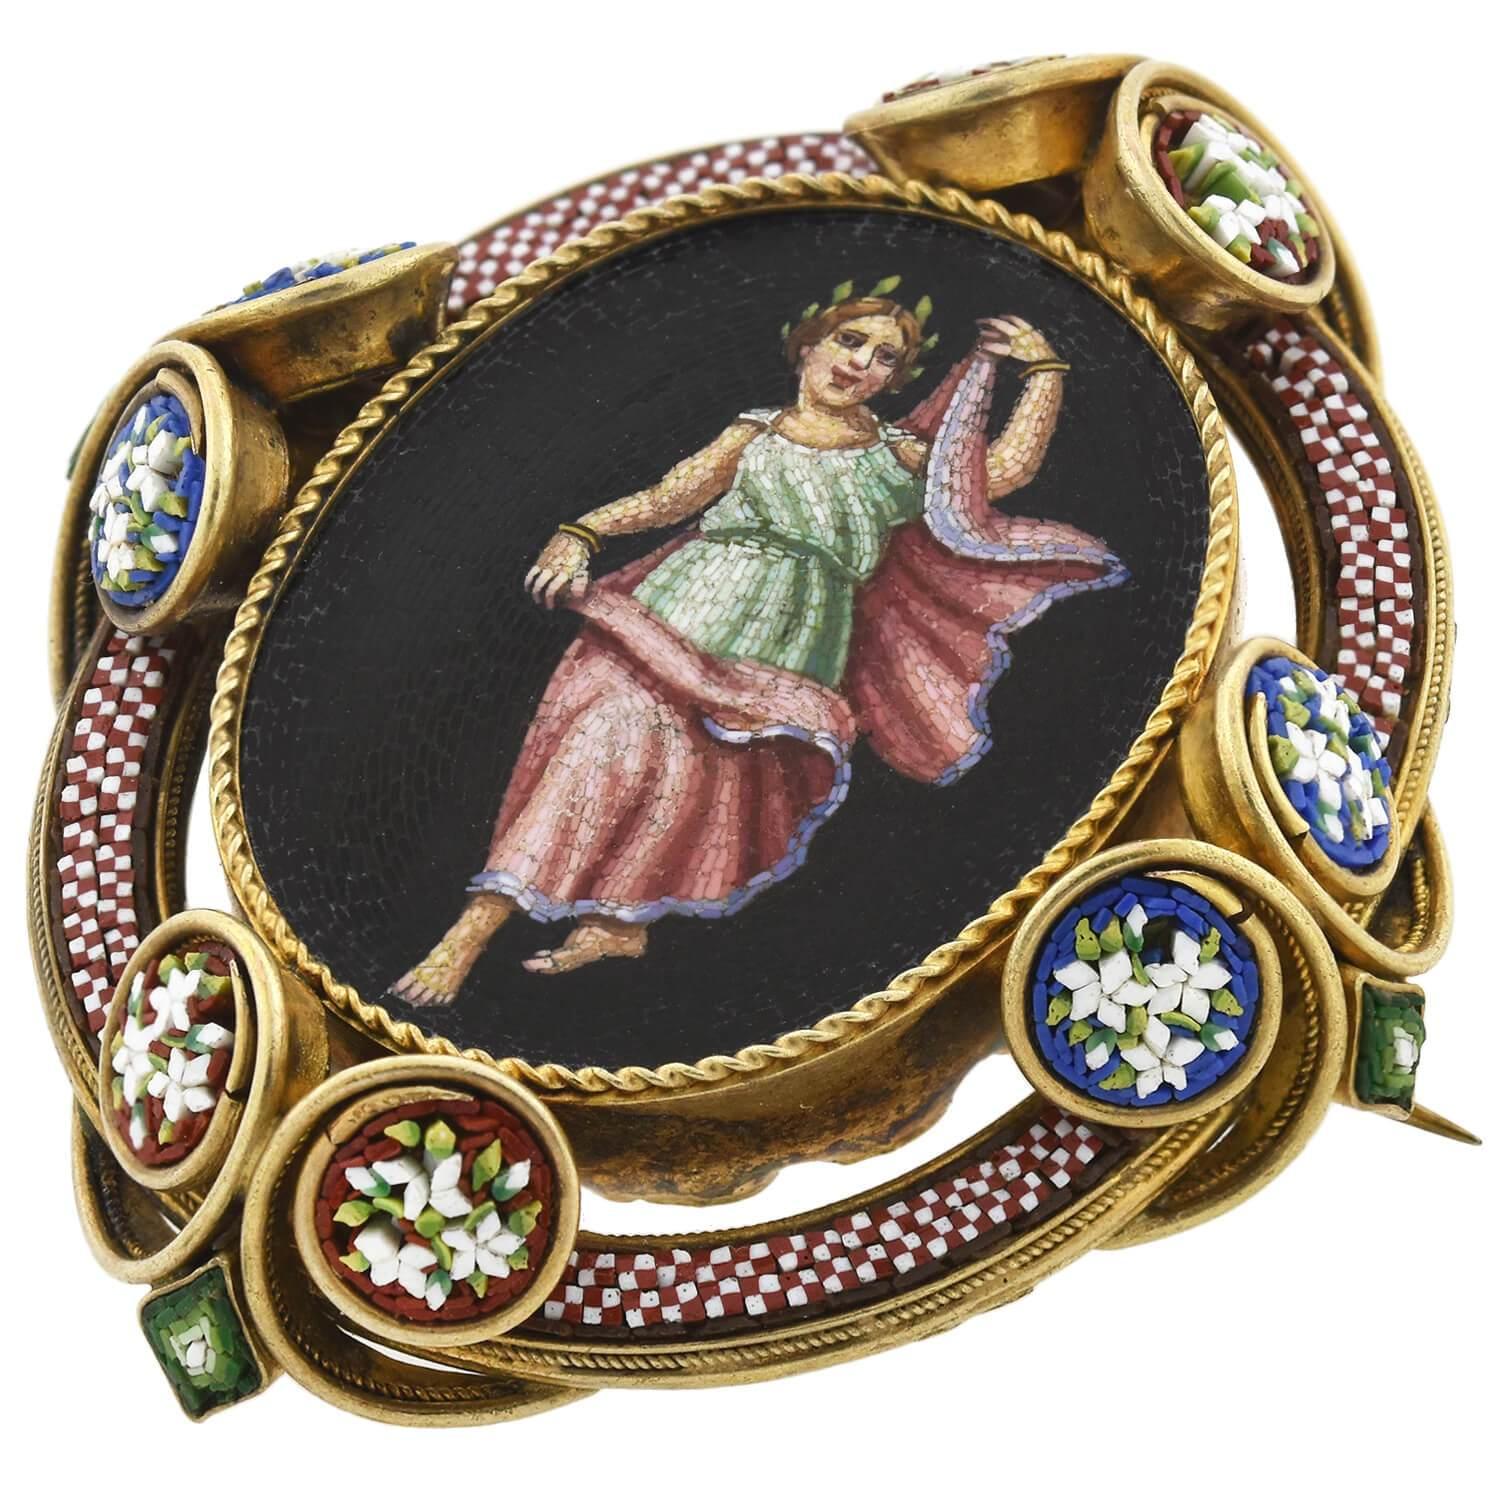 An absolutely wonderful micro mosaic pin/locket pendant from the Victorian (ca1880) era! The beautiful piece is crafted in vibrant 18kt yellow gold and an exceptional micro mosaic picture details the front. Tiny glass tiles of vividly colored glass